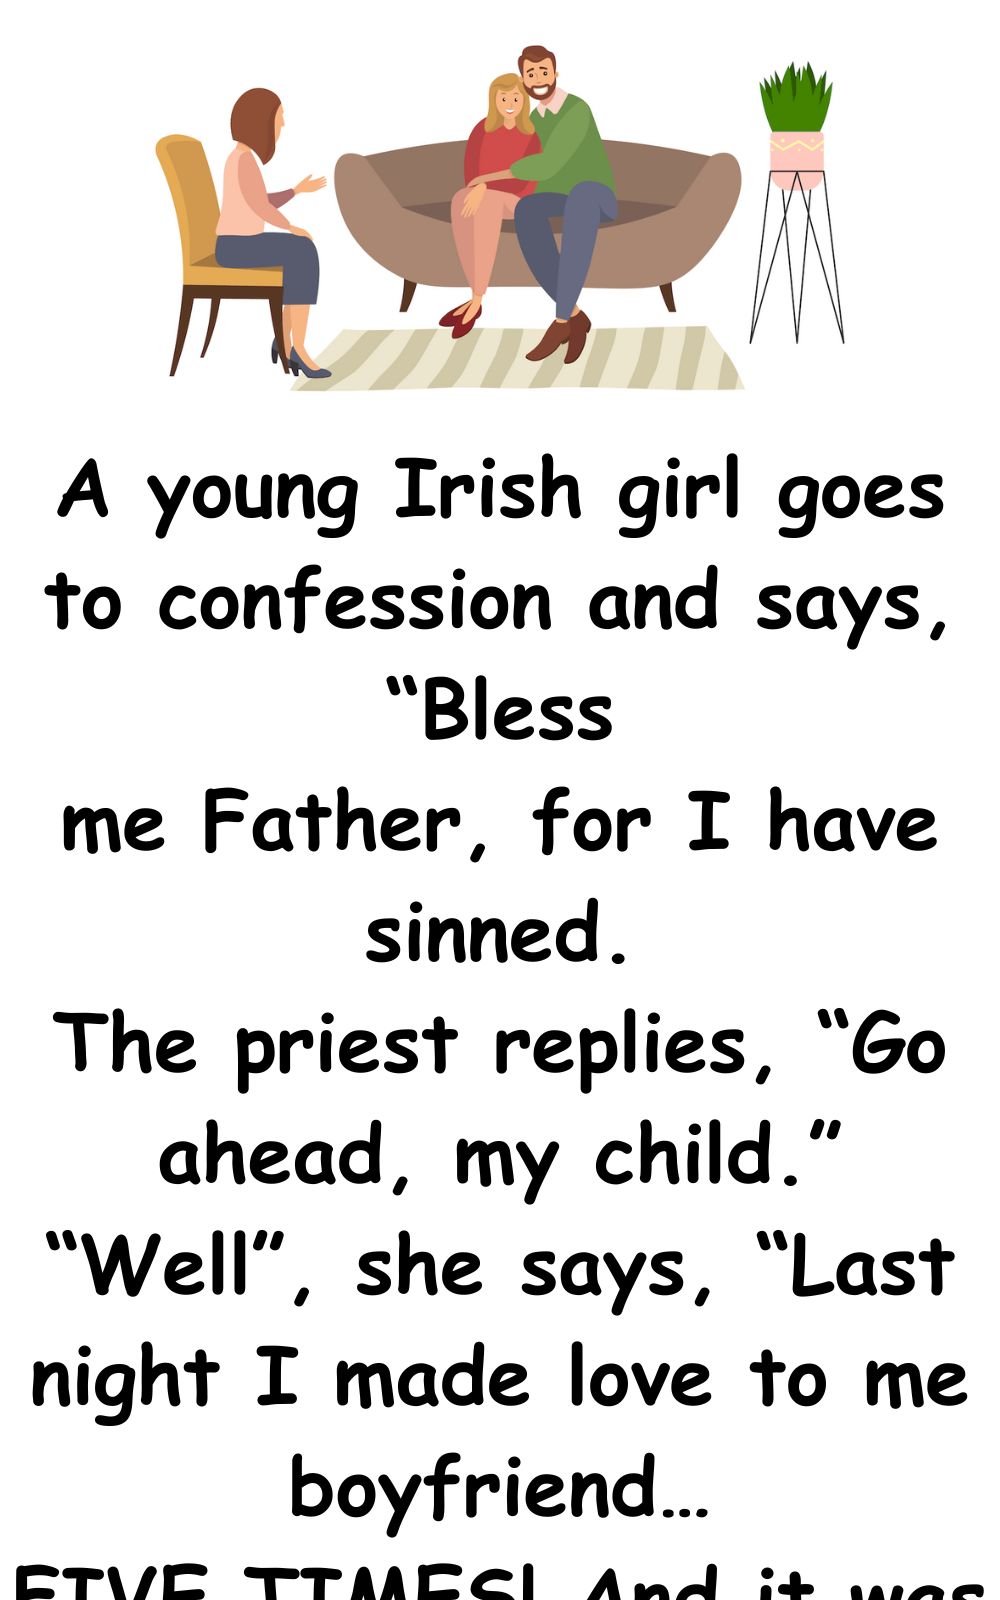 A young Irish girl goes to confession